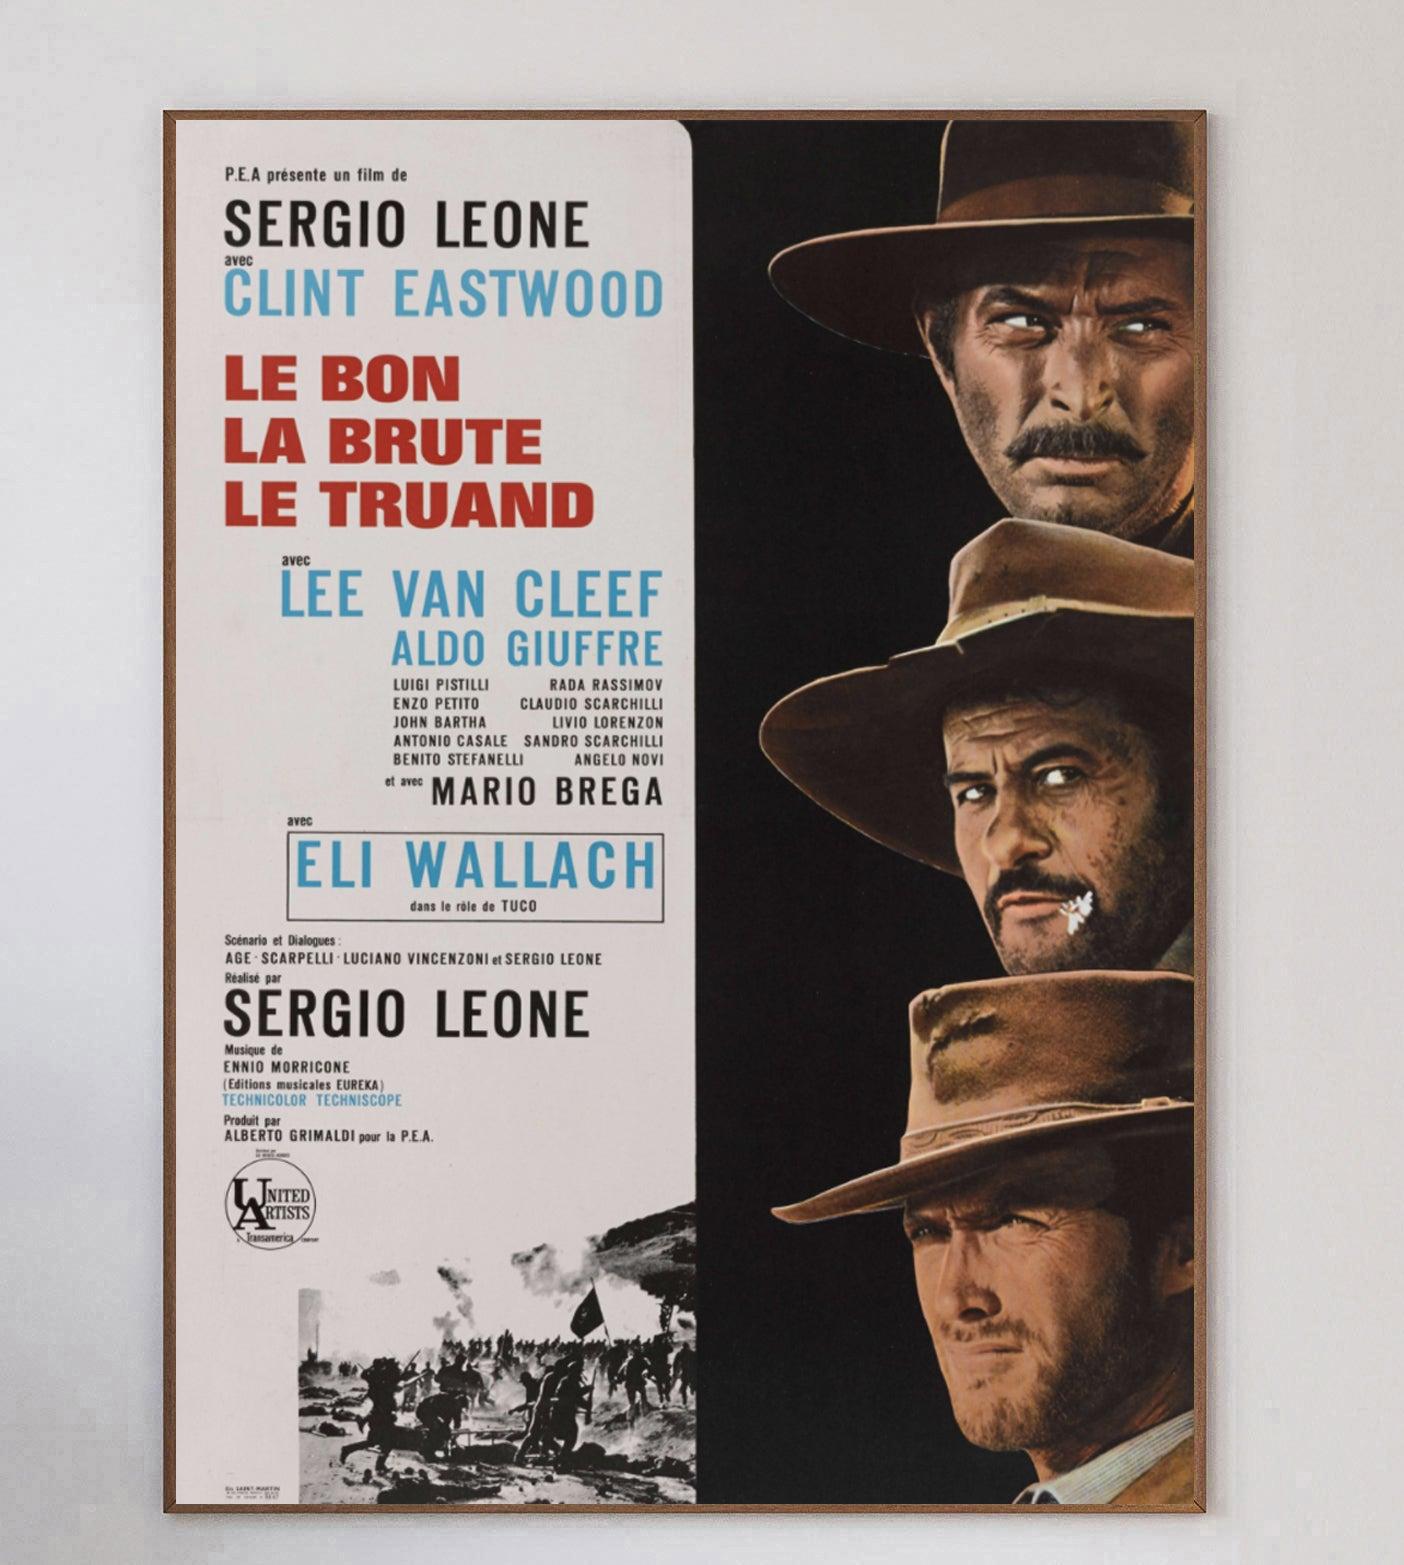 The Good, the Bad and the is a 1966 Italian epic Spaghetti Western film directed by Sergio Leone and starring Clint Eastwood as 